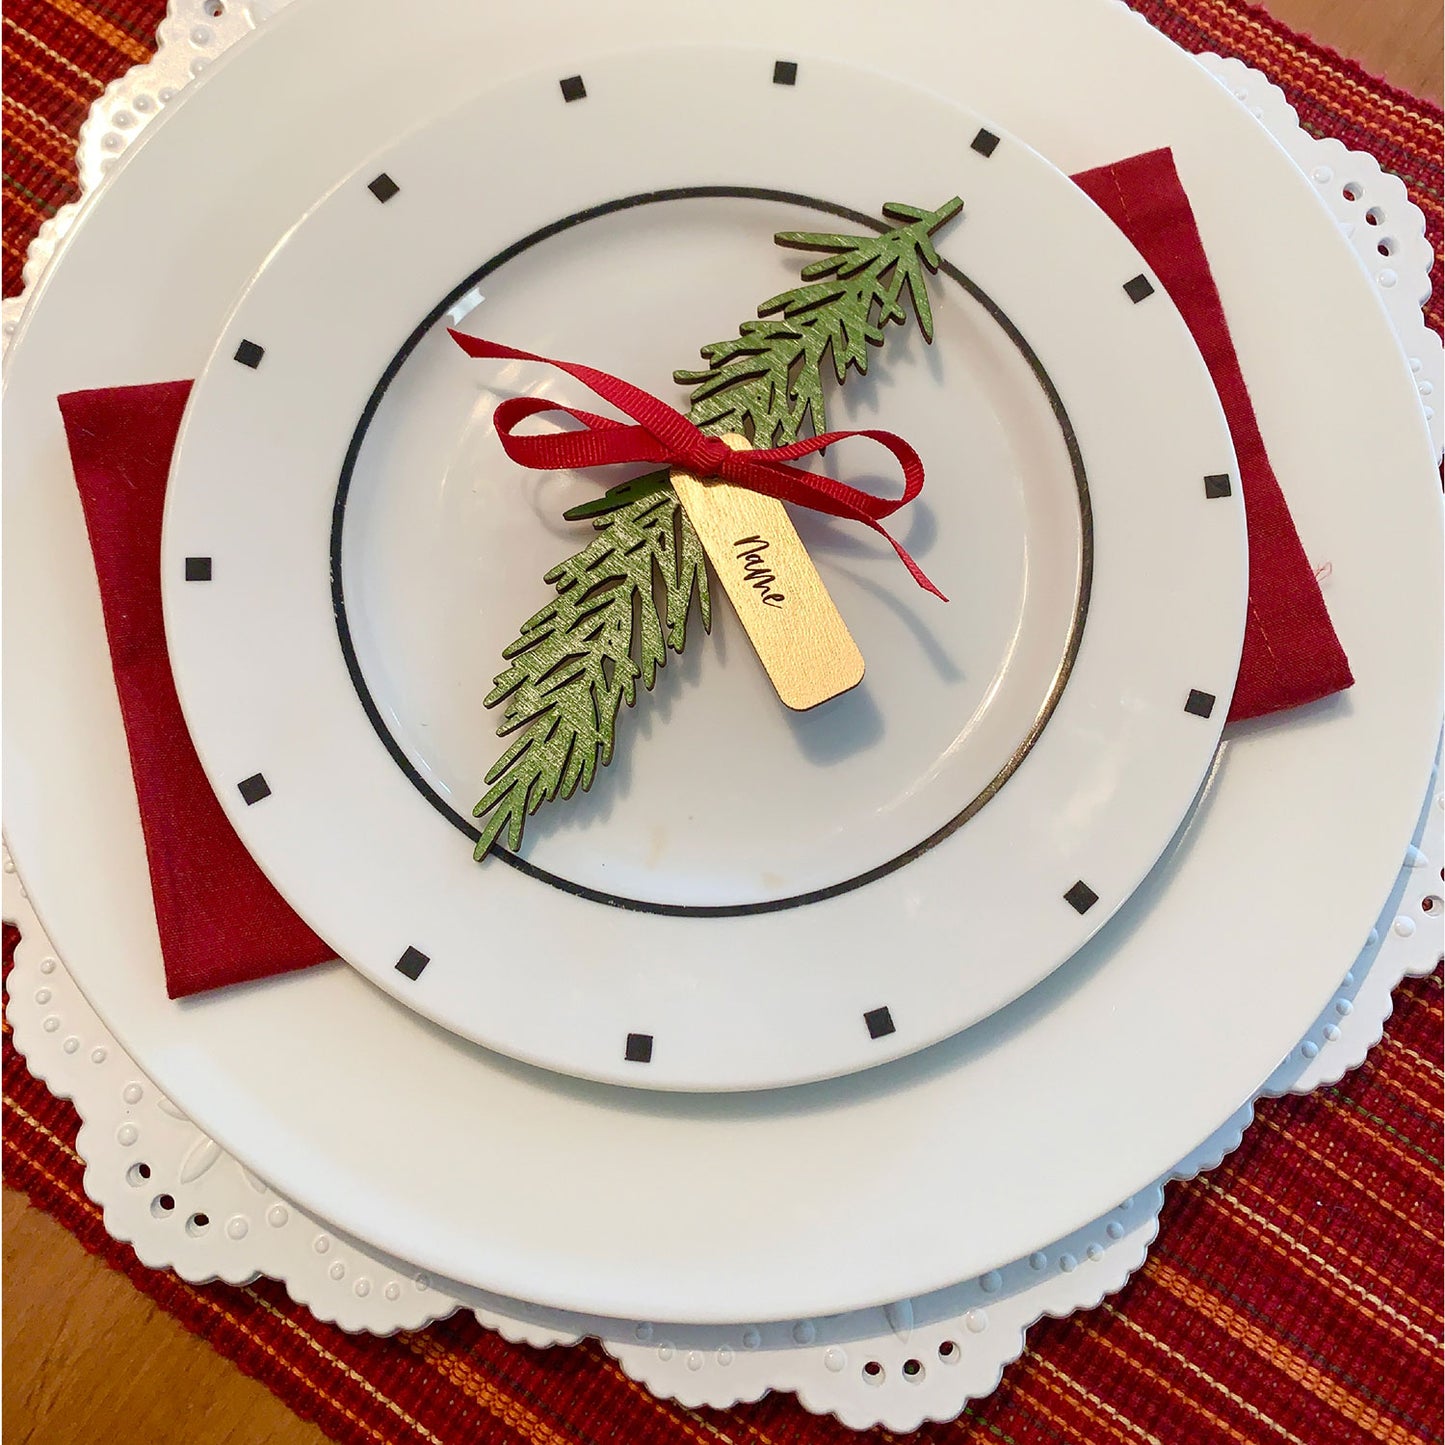 Pine Leaf Christmas Holiday Plate or Place Setting Decor